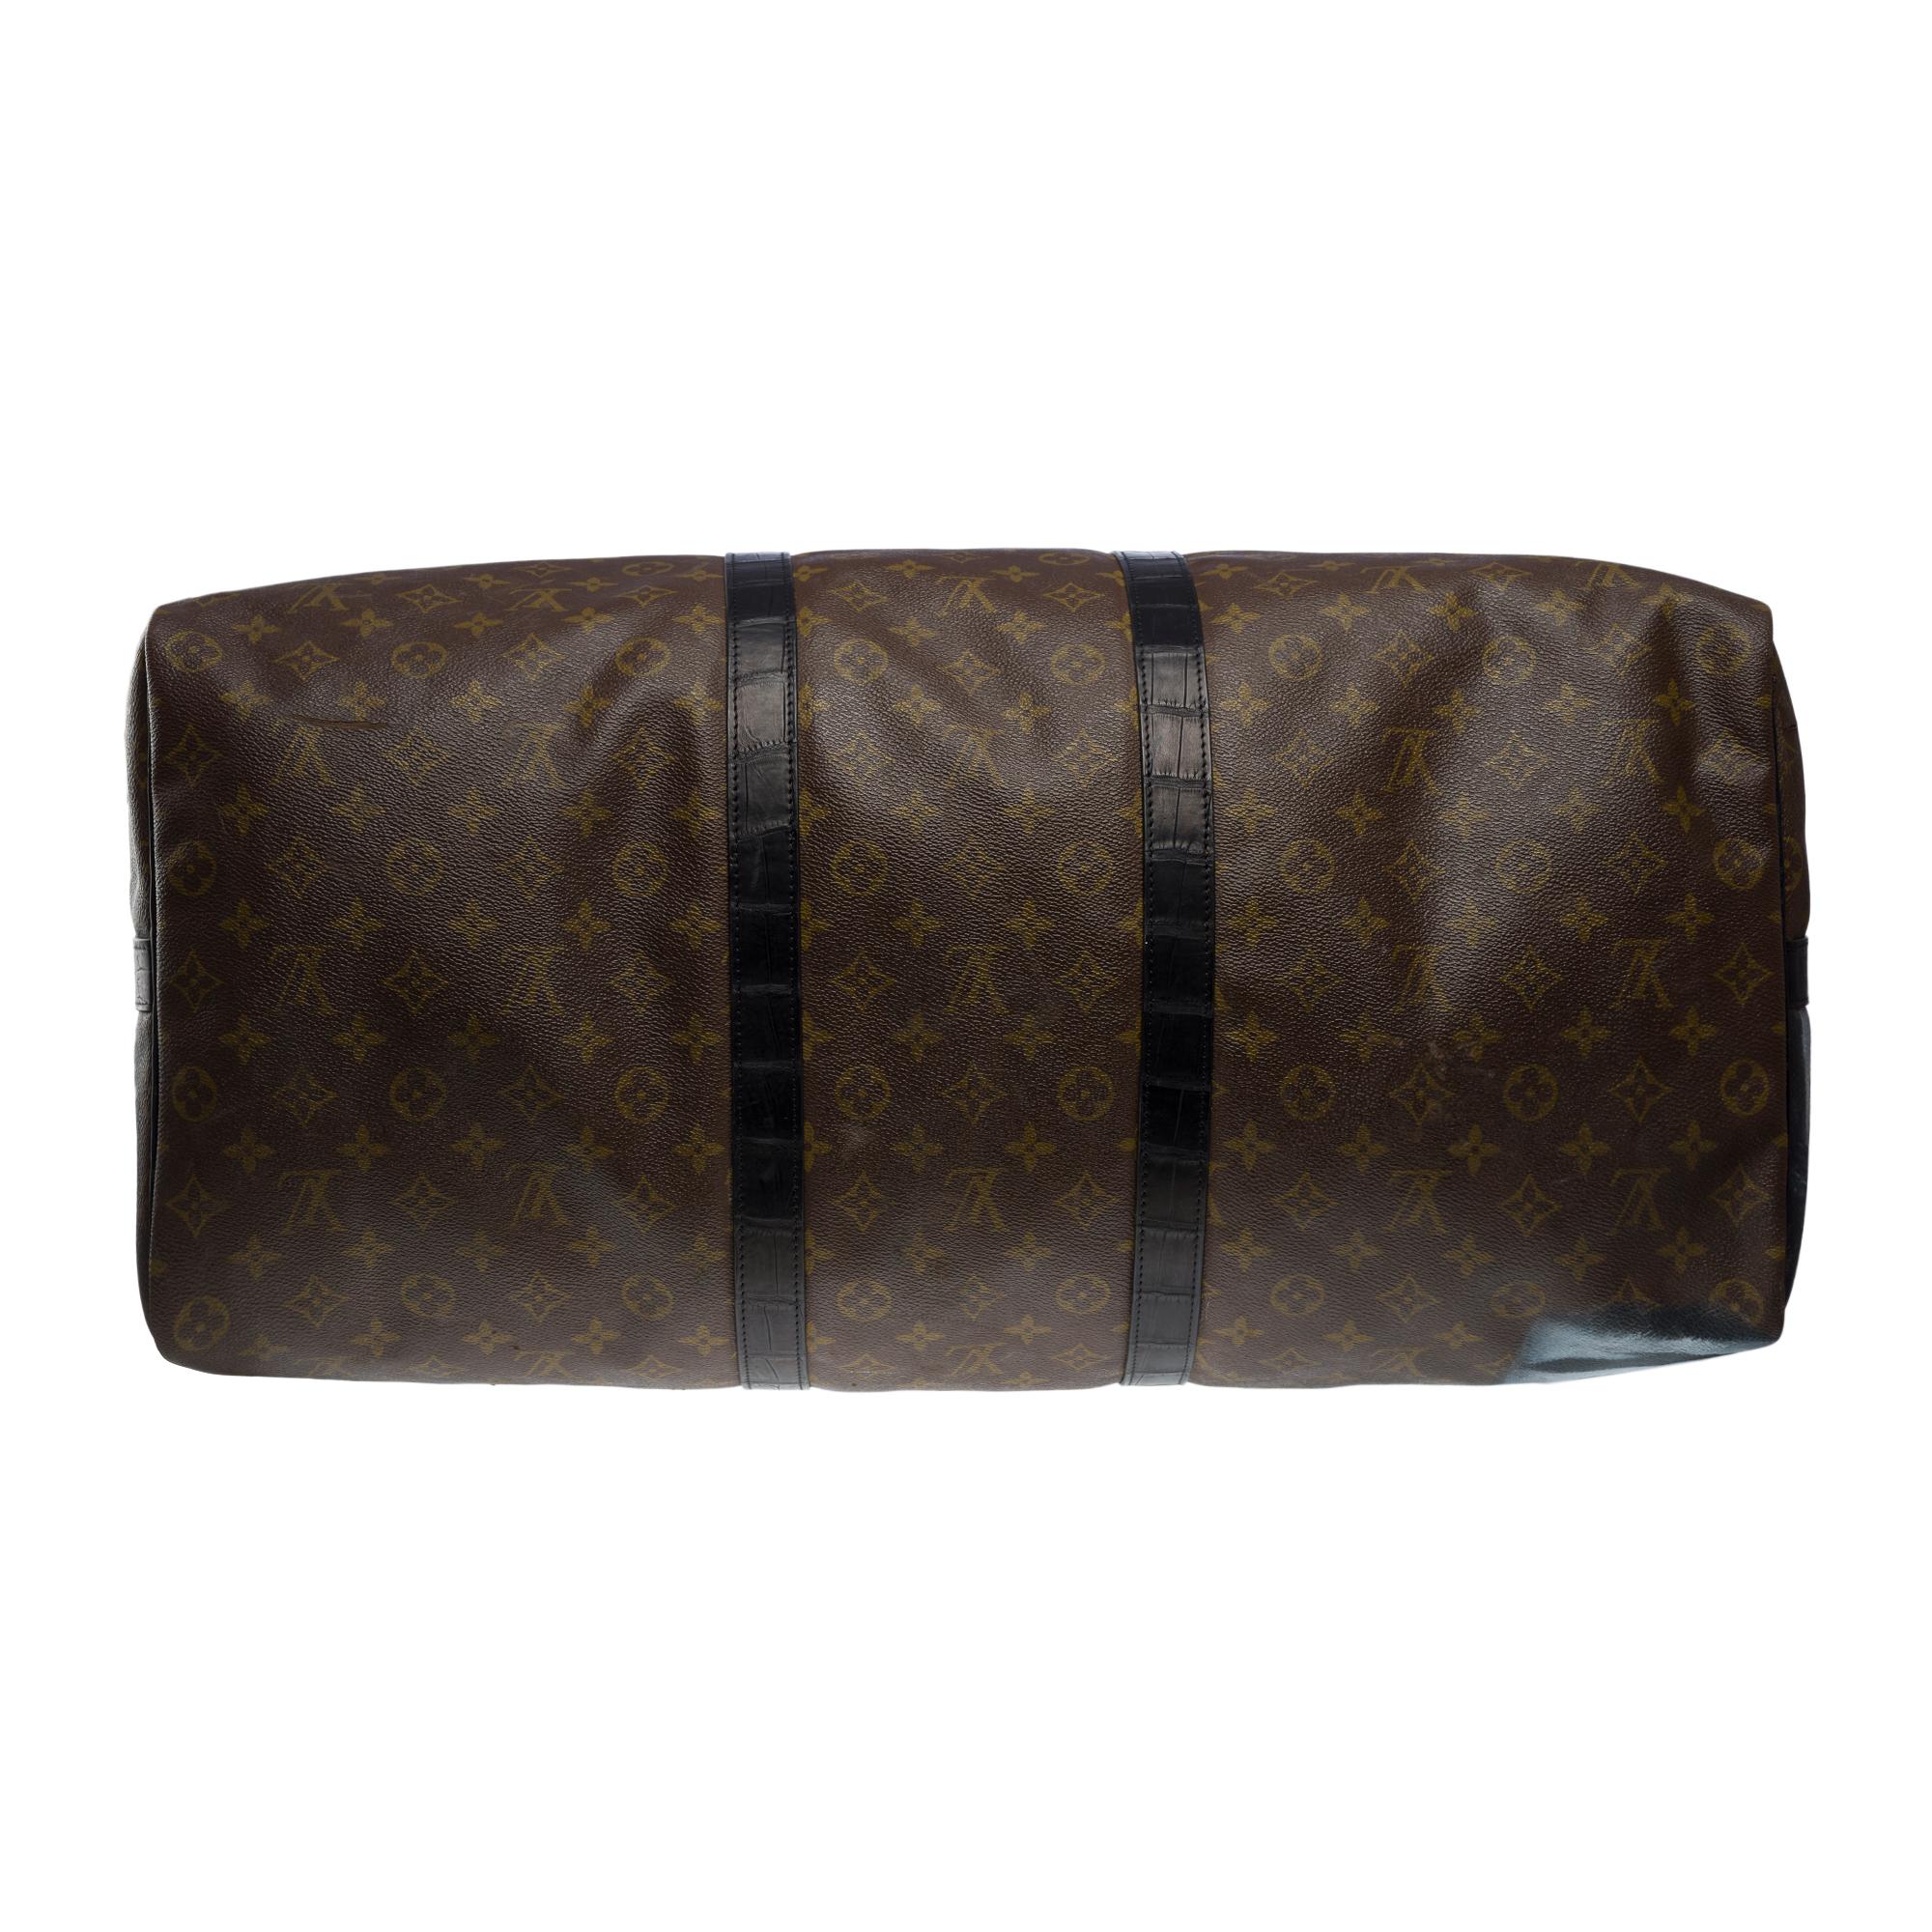 Customized Louis Vuitton Keepall 60 strap Travel bag with Black Crocodile For Sale 5